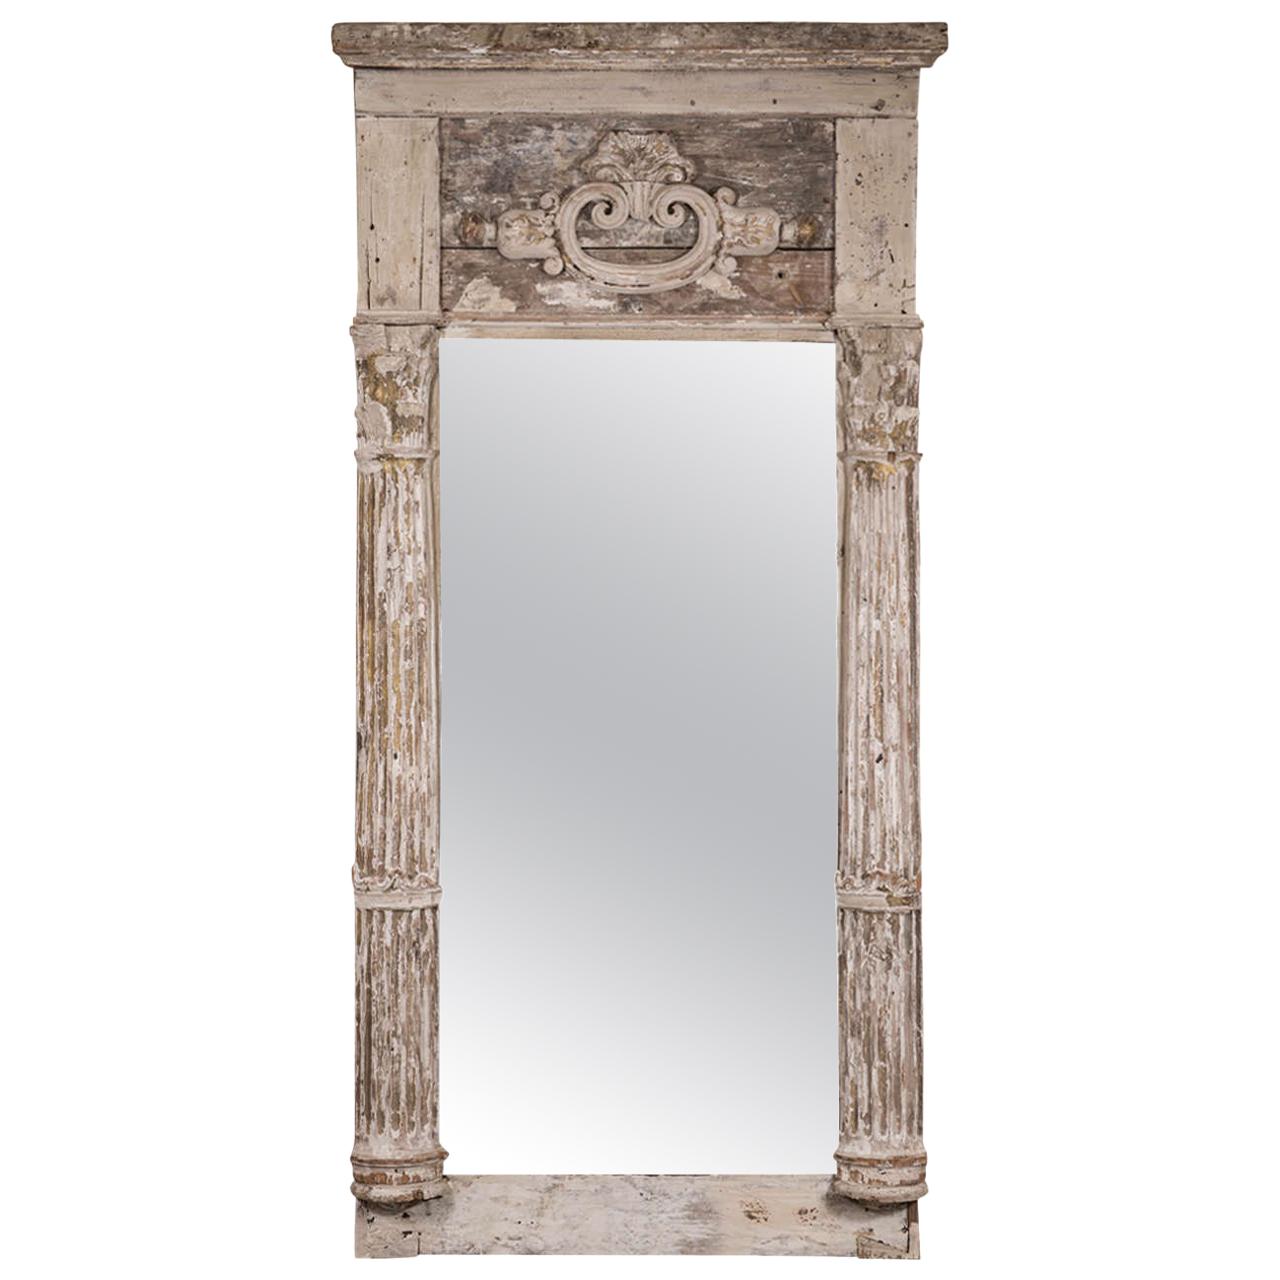 Creamy White Painted French Mirror